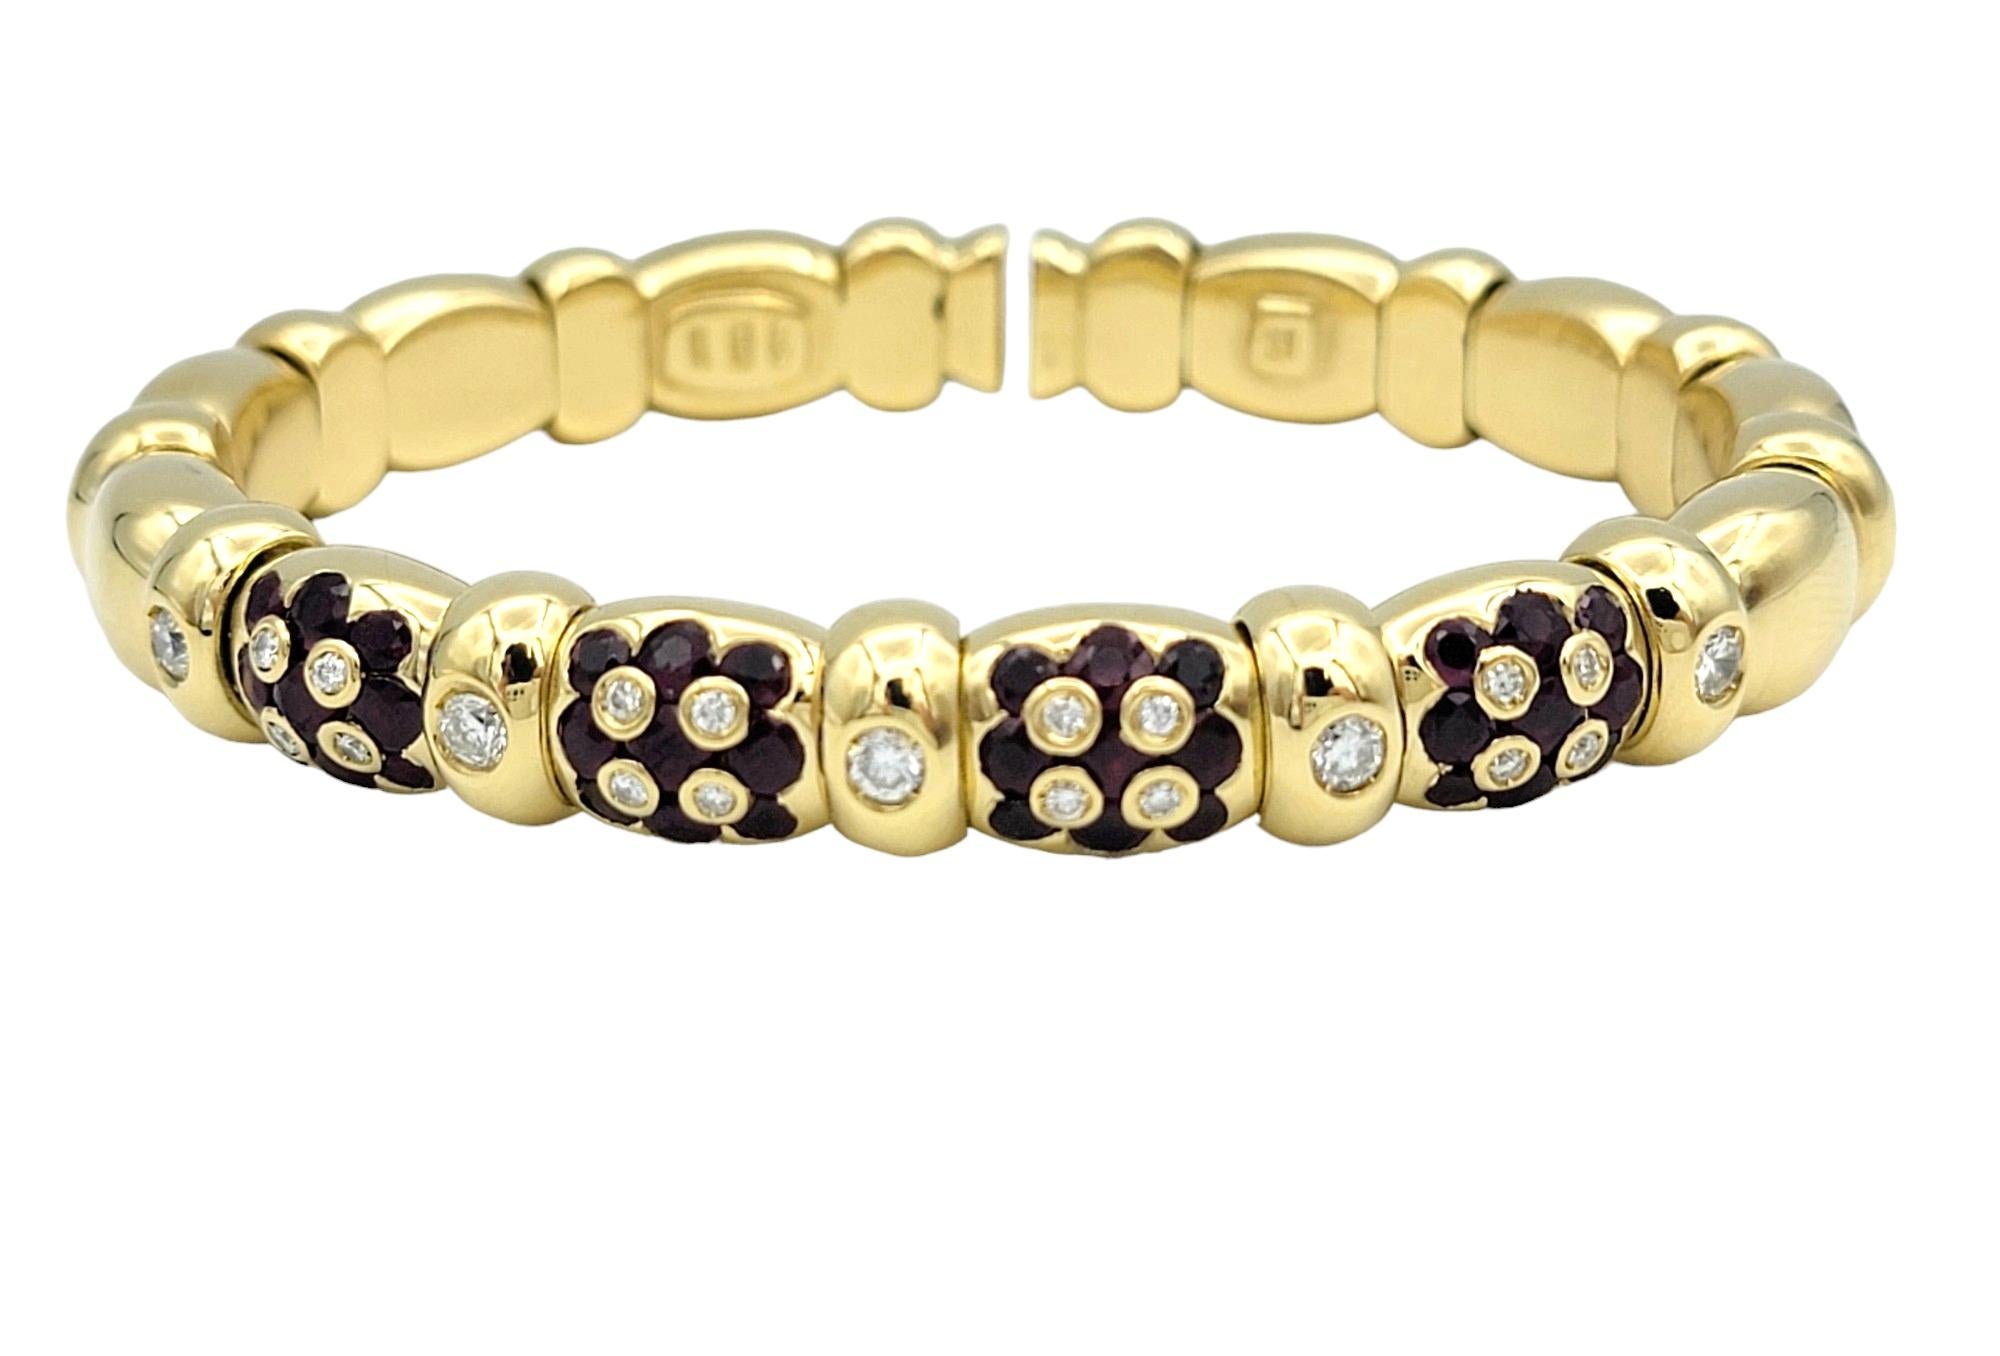 This stunning bracelet, crafted in radiant 18 karat yellow gold, is a true masterpiece of fine jewelry. The alternating beaded links create a captivating rhythm and texture, enhancing the bracelet's overall allure. Each link is meticulously adorned